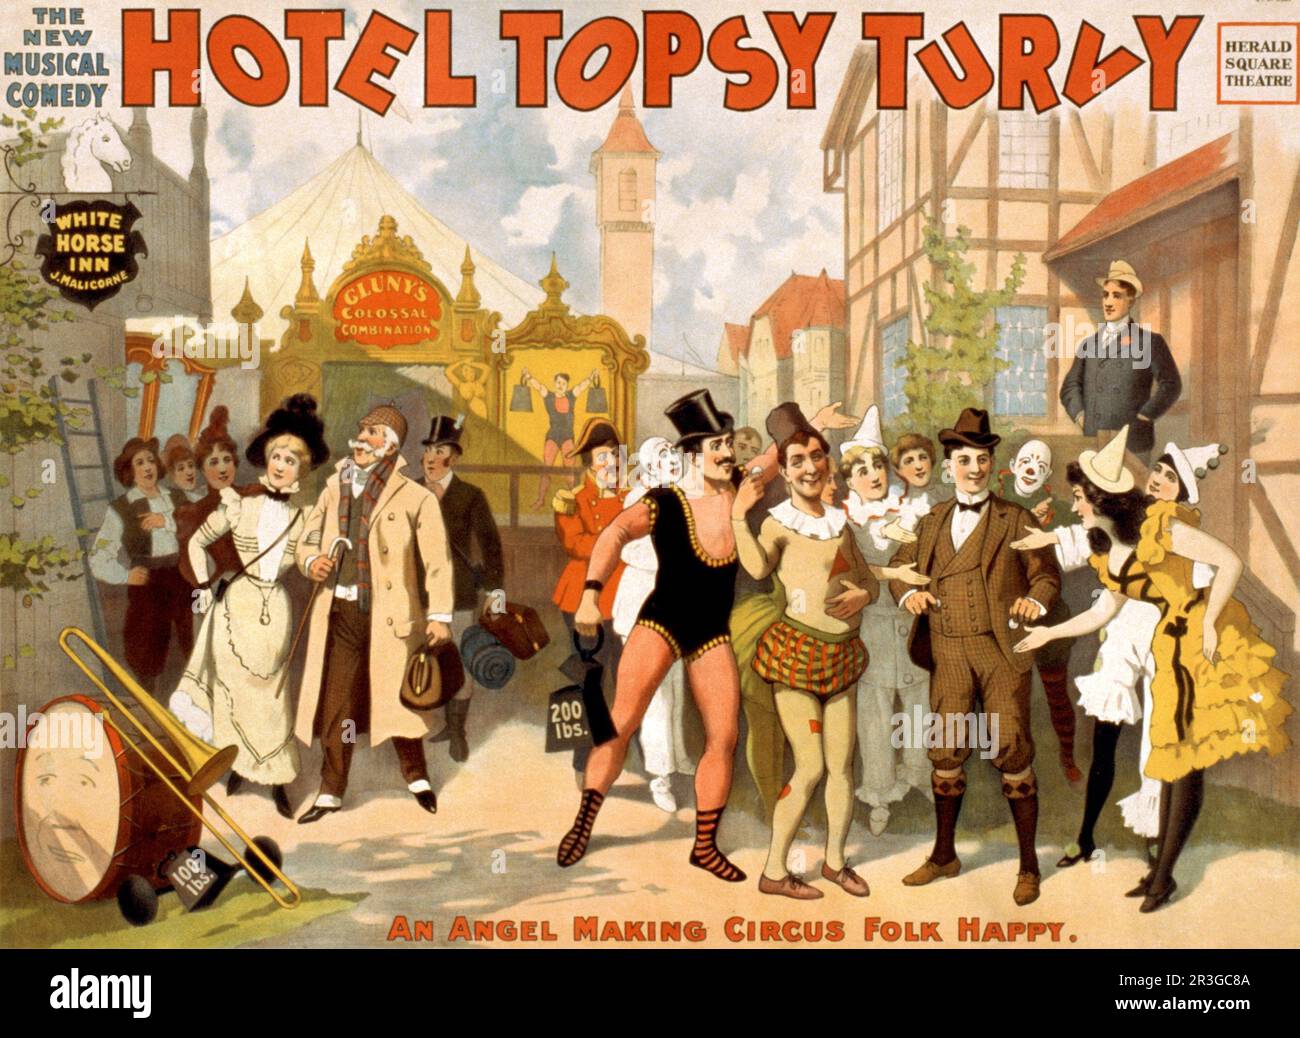 The new musical comedy, Hotel Topsy Turvy, circa 1899. Stock Photo